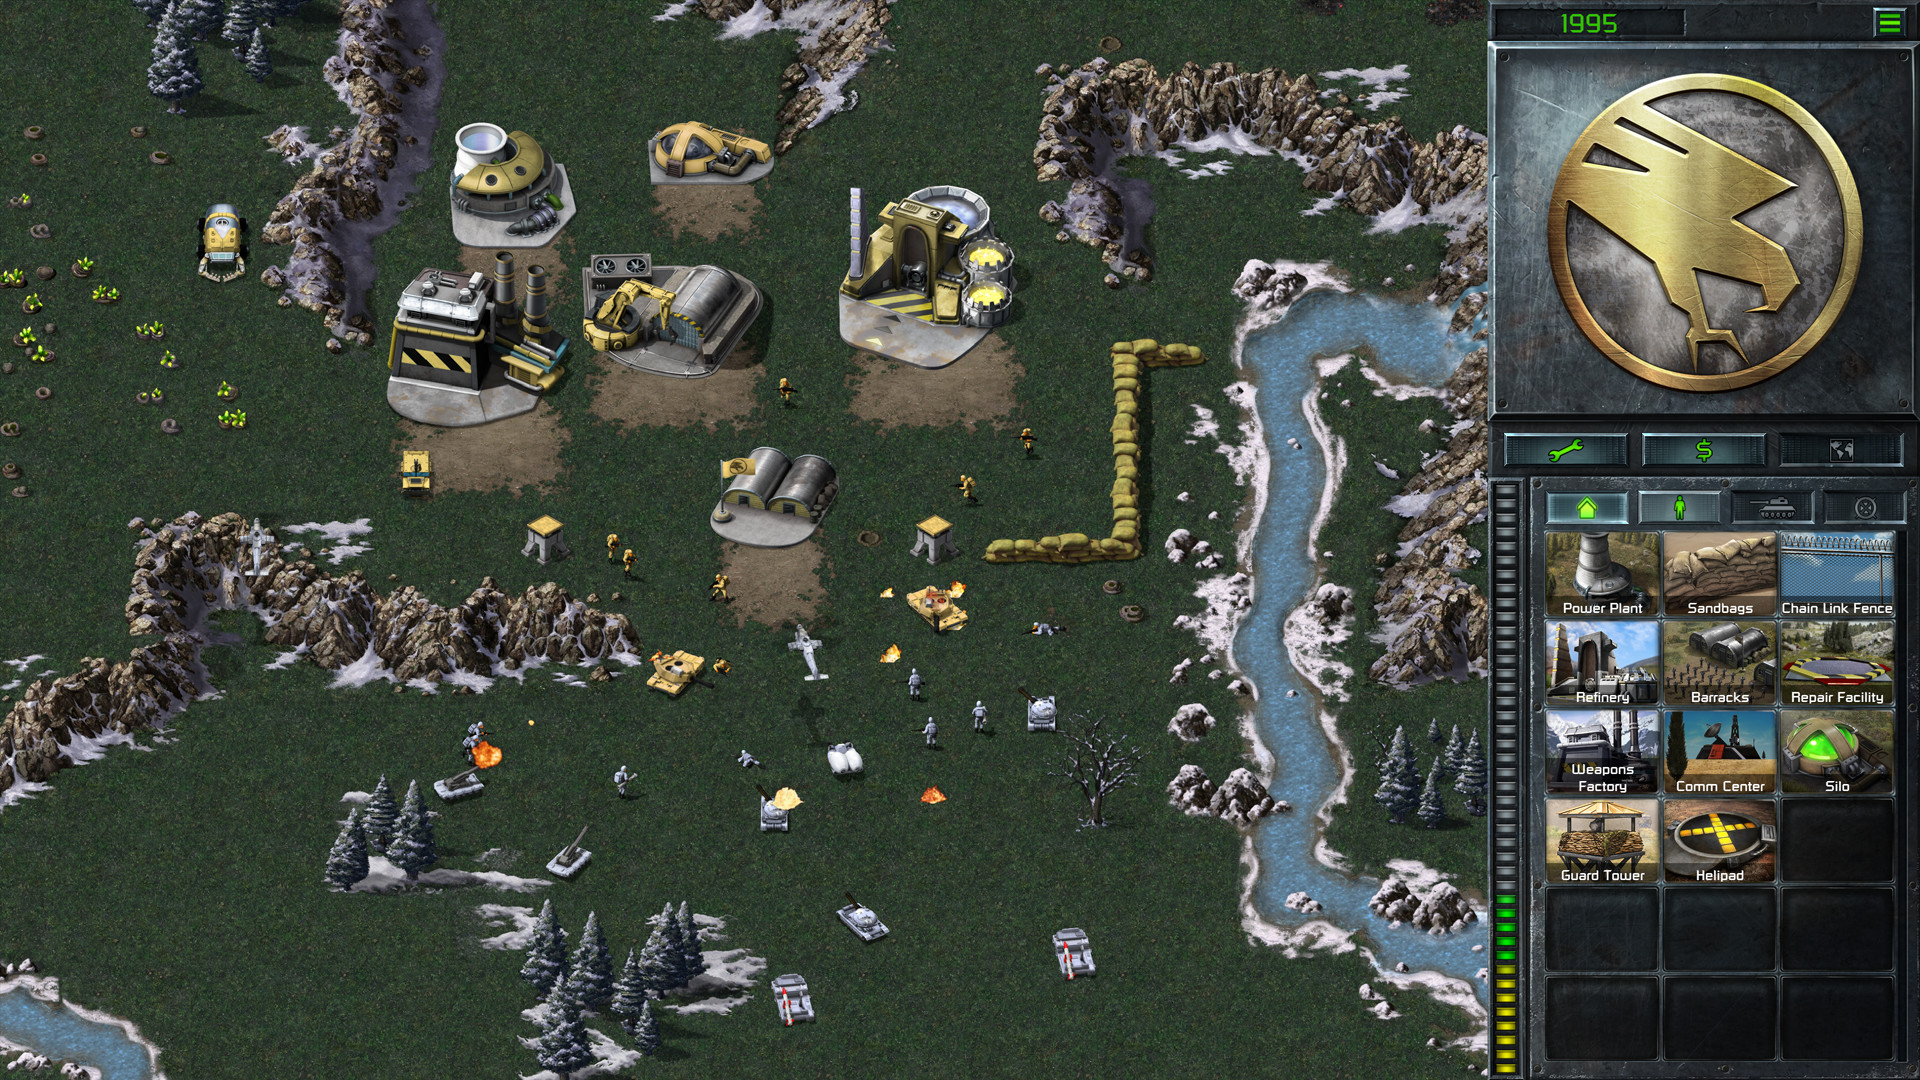 Команд игра стратегия. Command and Conquer Remastered. Command Conquer 1995. Command and Conquer Remastered 2020. Command & Conquer Remastered collection.